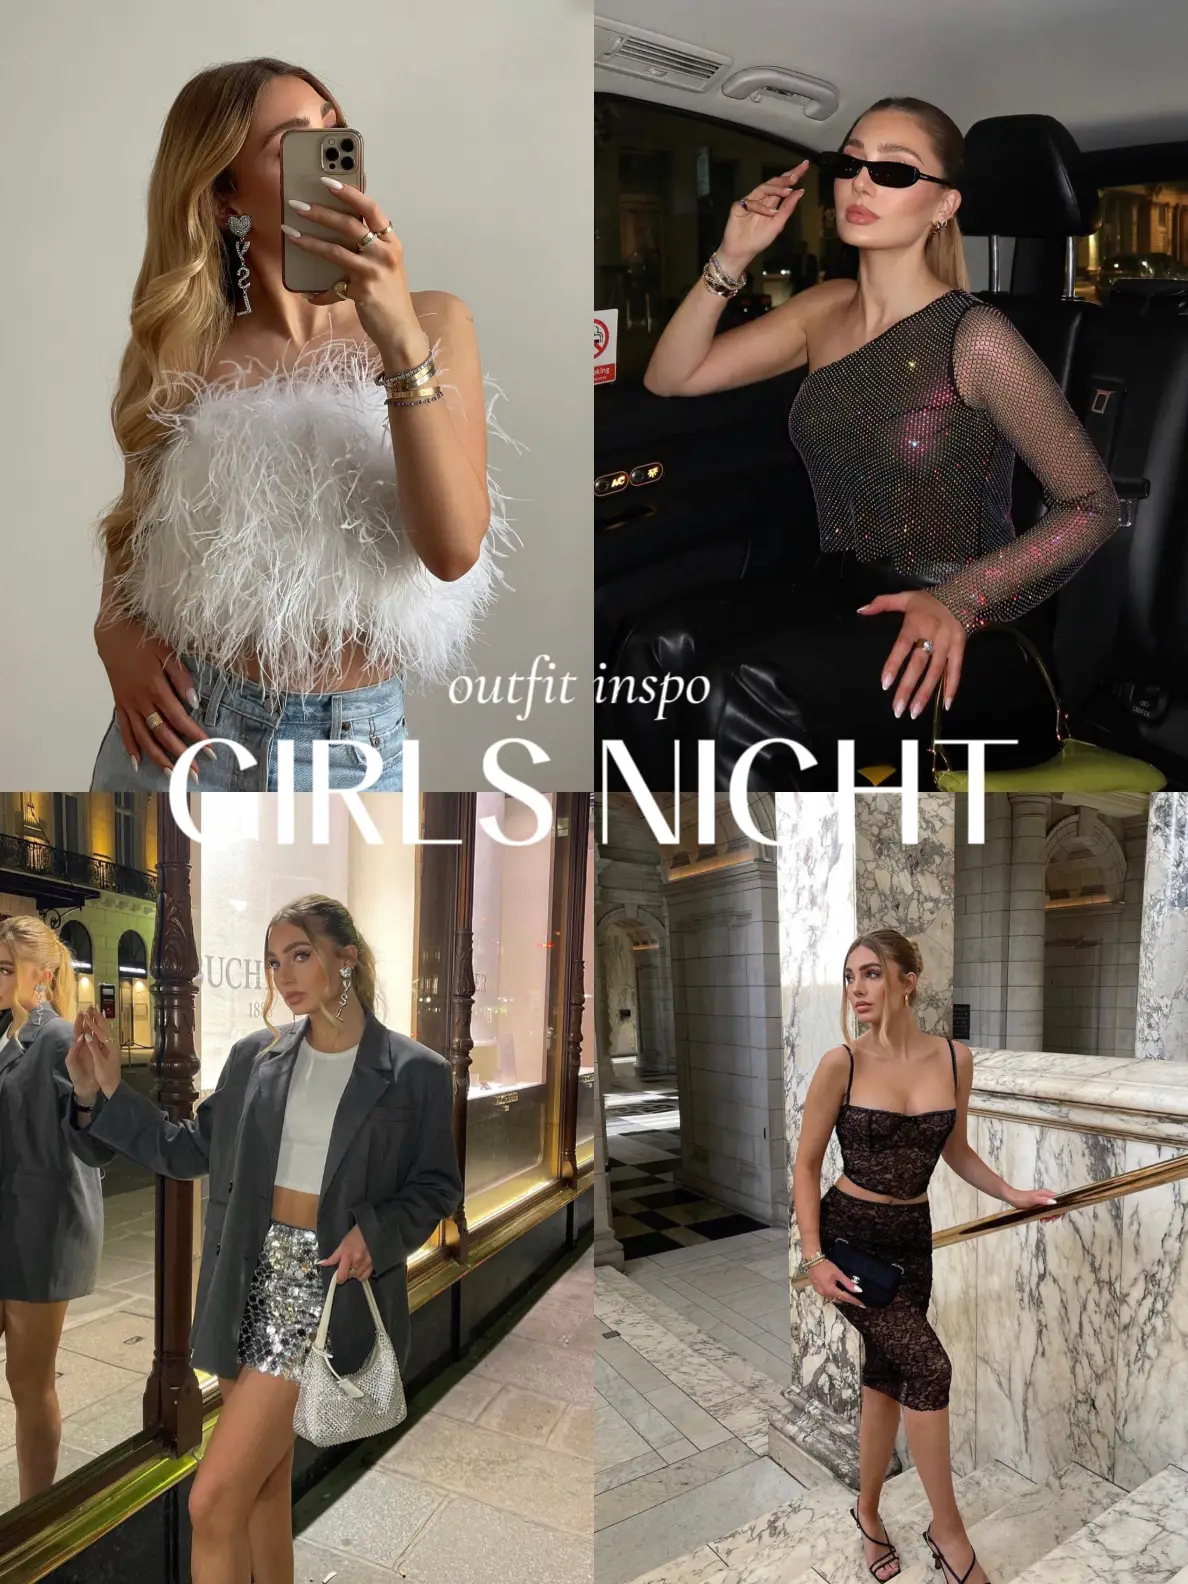 OUTFIT INSPO - GIRLS NIGHT, Gallery posted by loulouduvillier